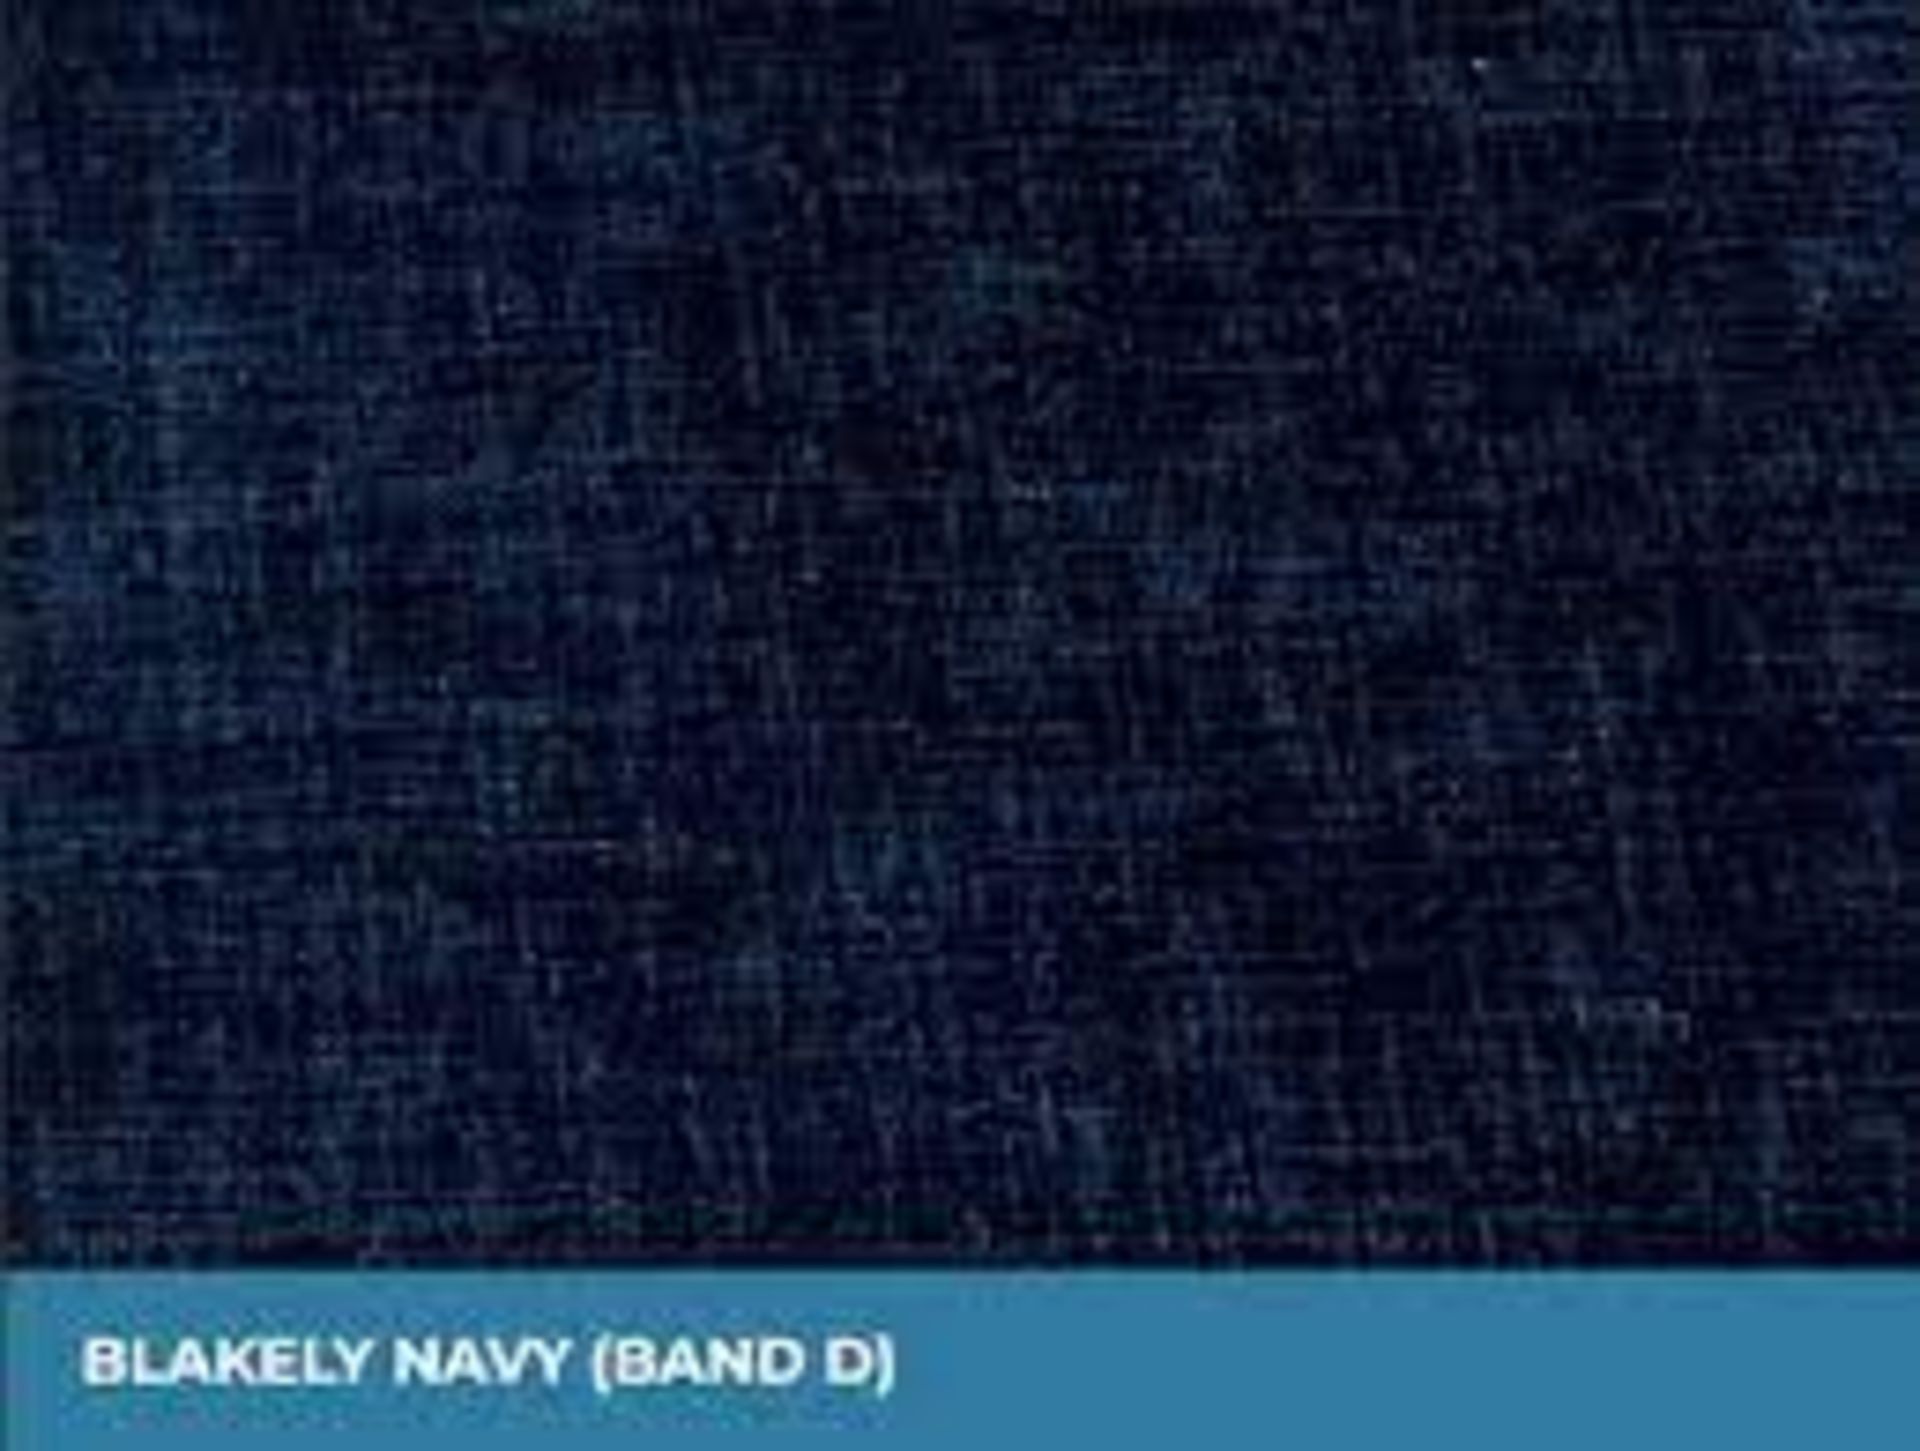 NEW ROLL TO CONTAIN 31.7 METRES OF BEATRIX MARYLAMB 17 NIGHT SKY FIRE RESISTANT FABRIC. RRP £33.00